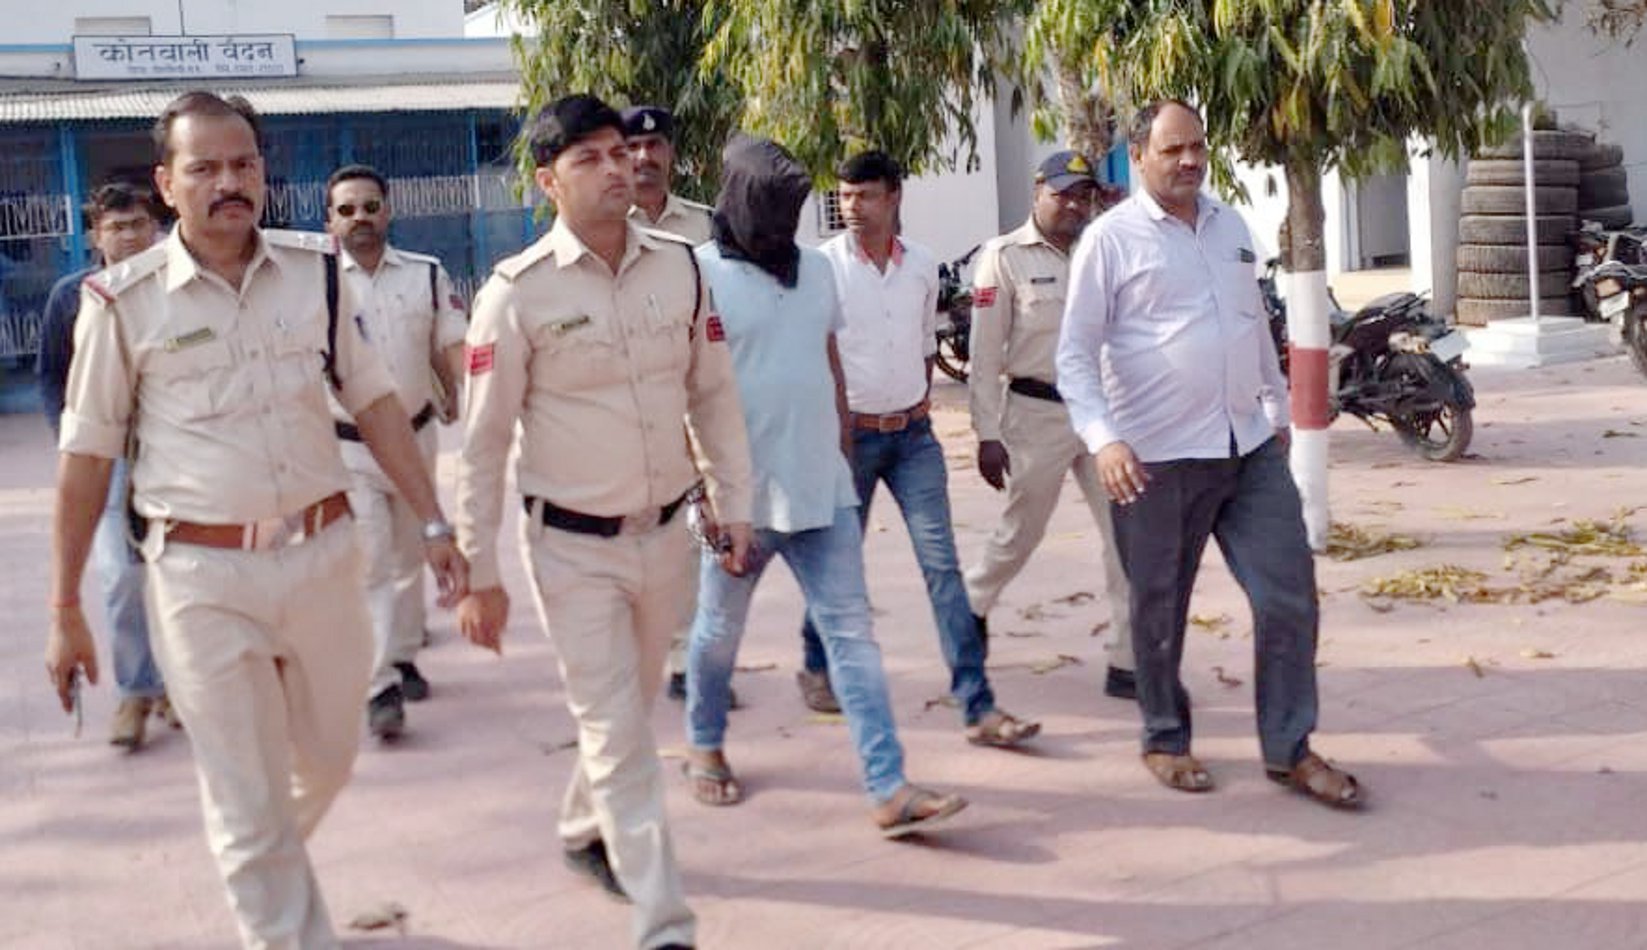 Bengal police arrested with the help of Singrauli police